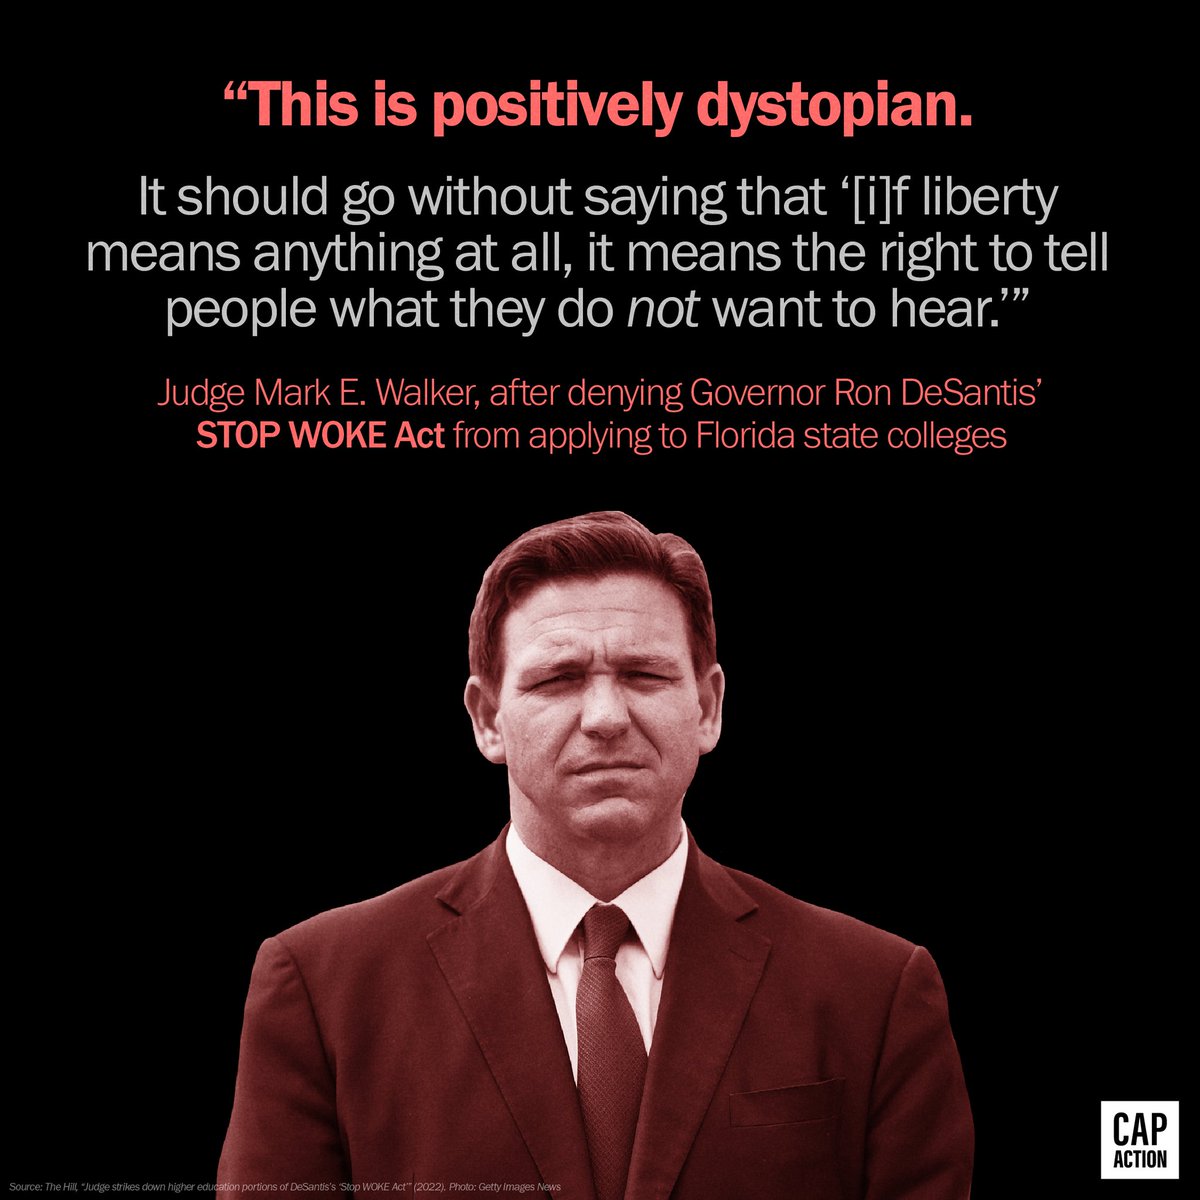 Governor Ron DeSantis' Stop WOKE Act was overruled by the courts. Judge Walker wrote. 'The First Amendment does not permit the State of Florida to muzzle its university professors, impose its own orthodoxy of viewpoints, and cast us all into the dark.'